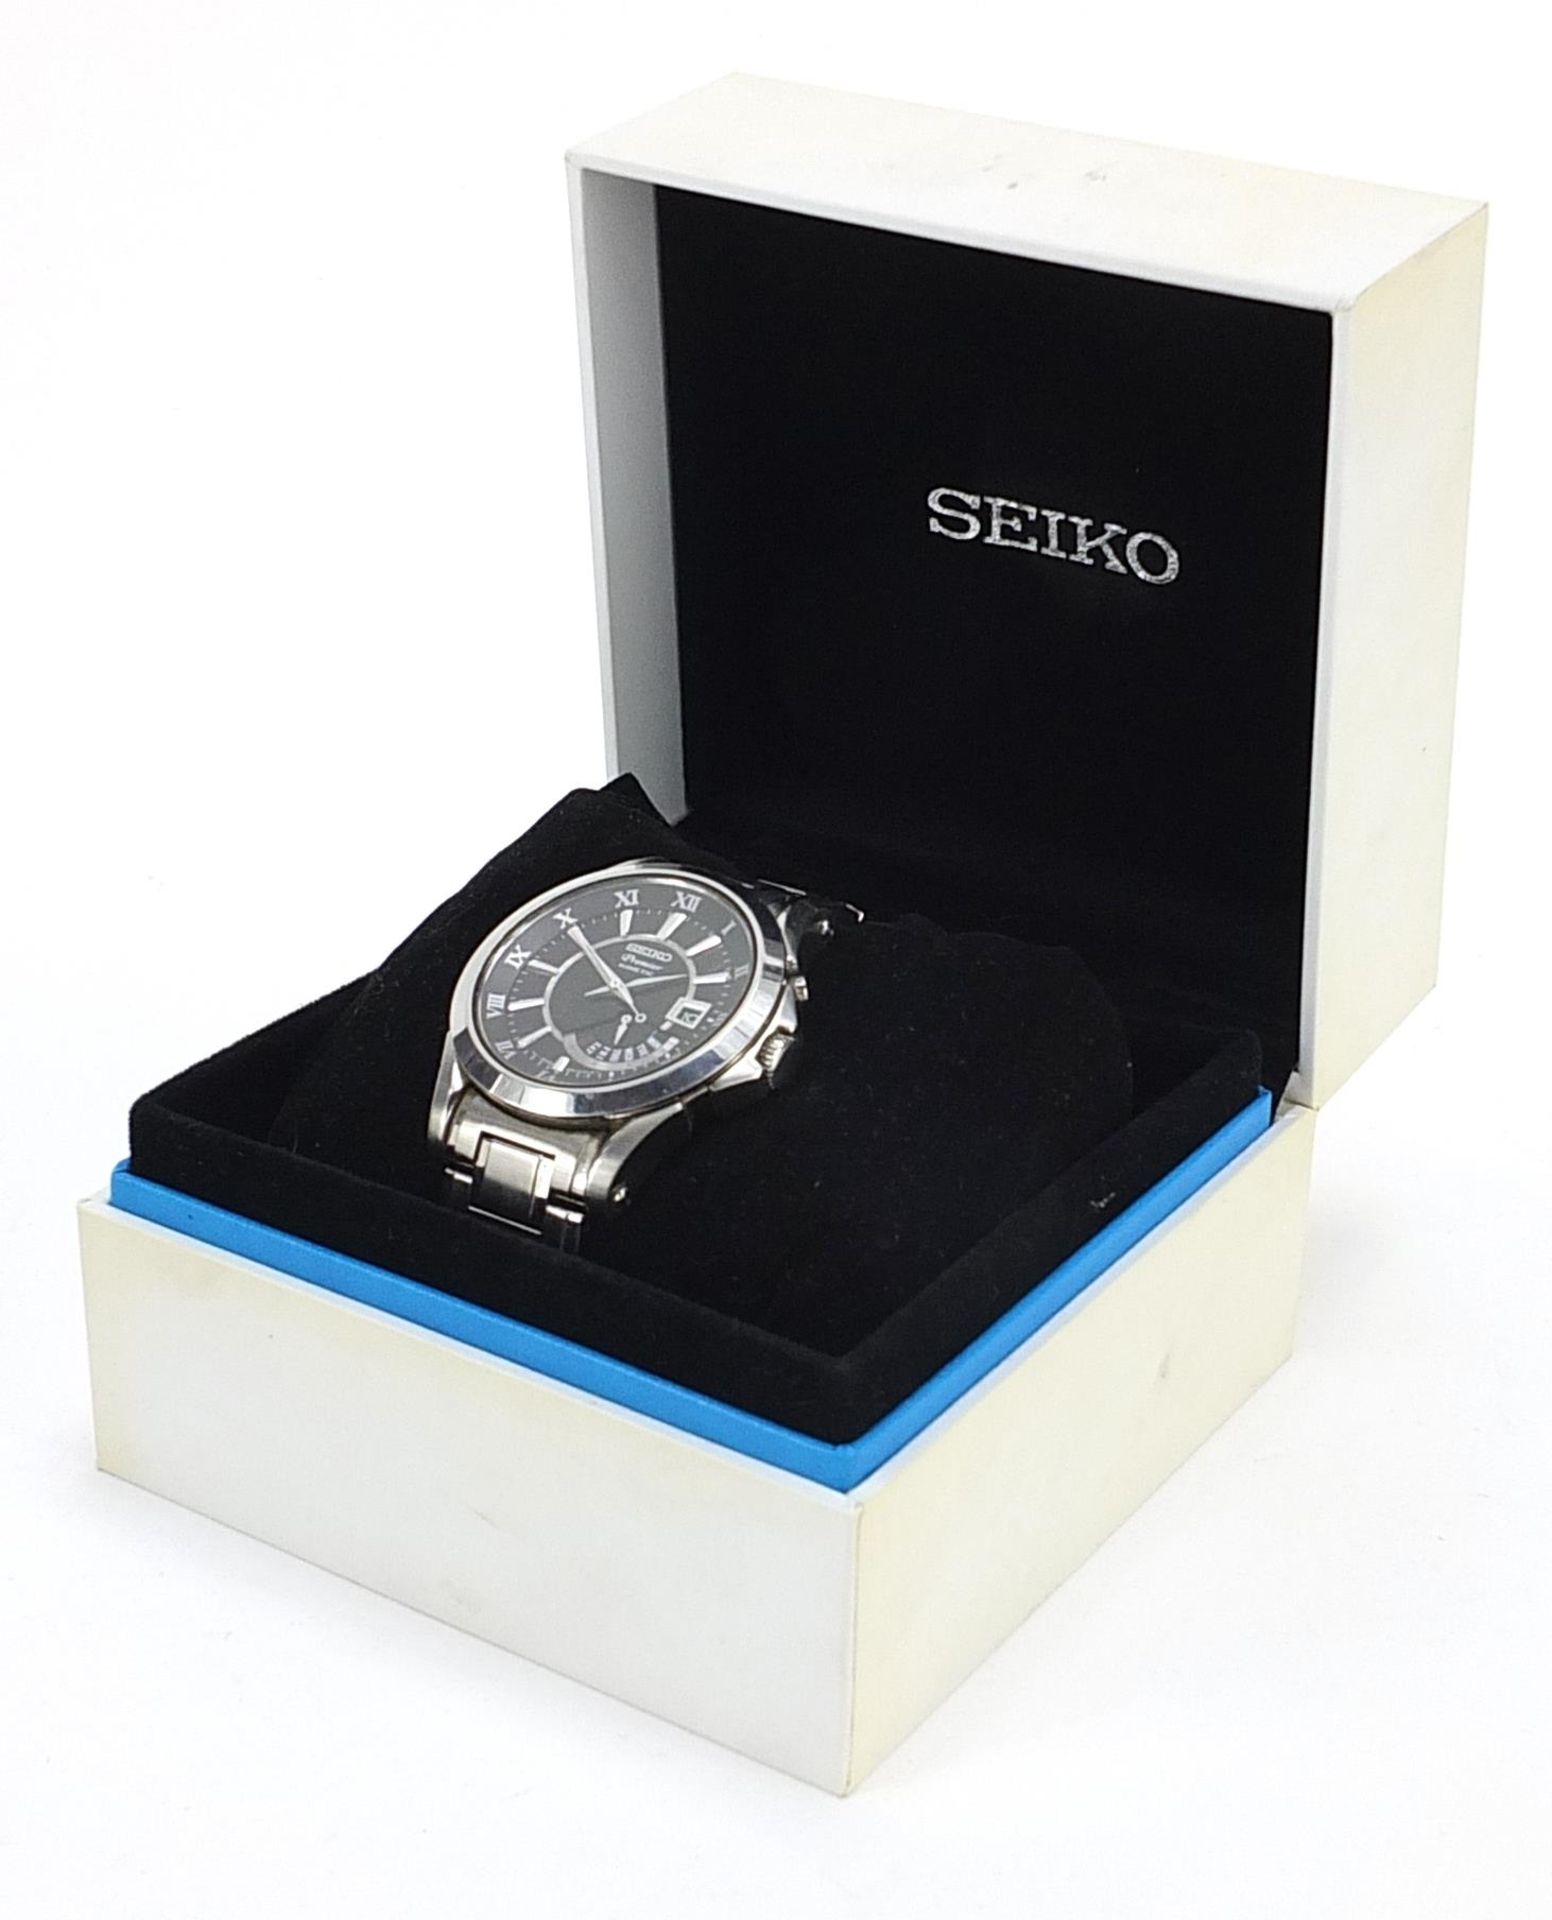 Seiko, gentlemen's Seiko Premier kinetic wristwatch with date aperture with box and original receipt - Image 5 of 6